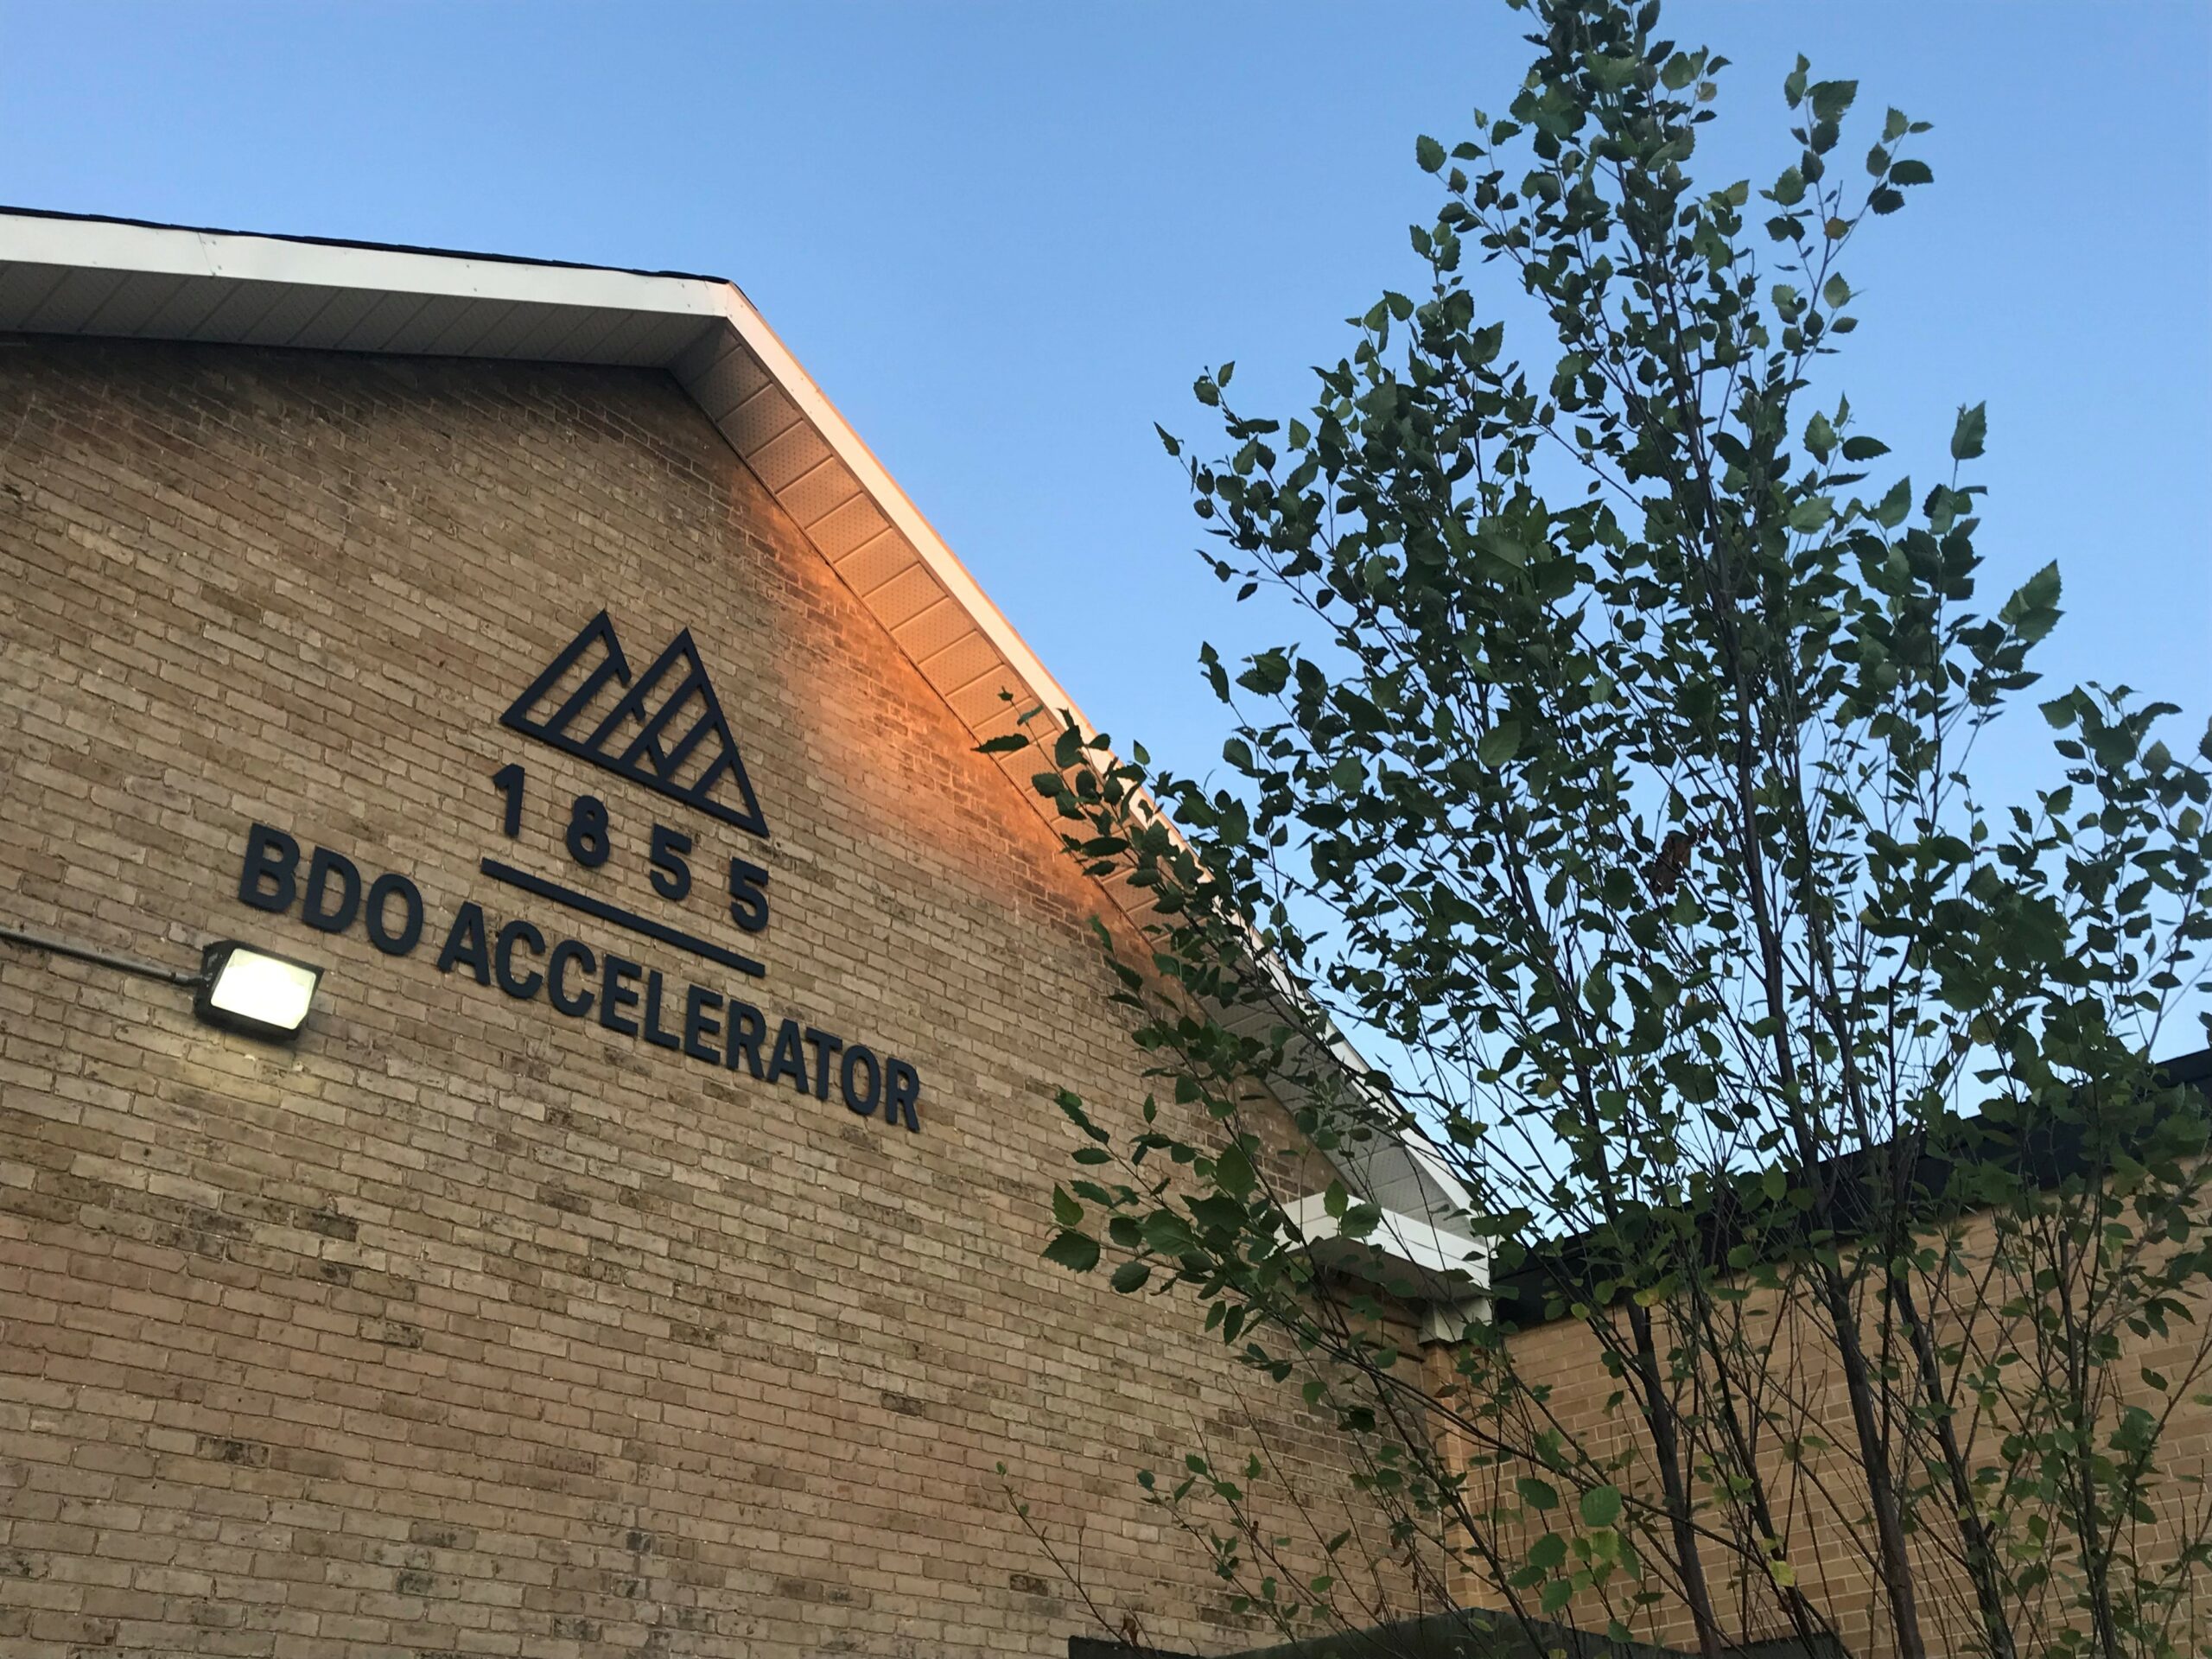 BDO Announces Facility Naming Partnership with 1855 Whitby, Durham Region’s First Technology Accelerator